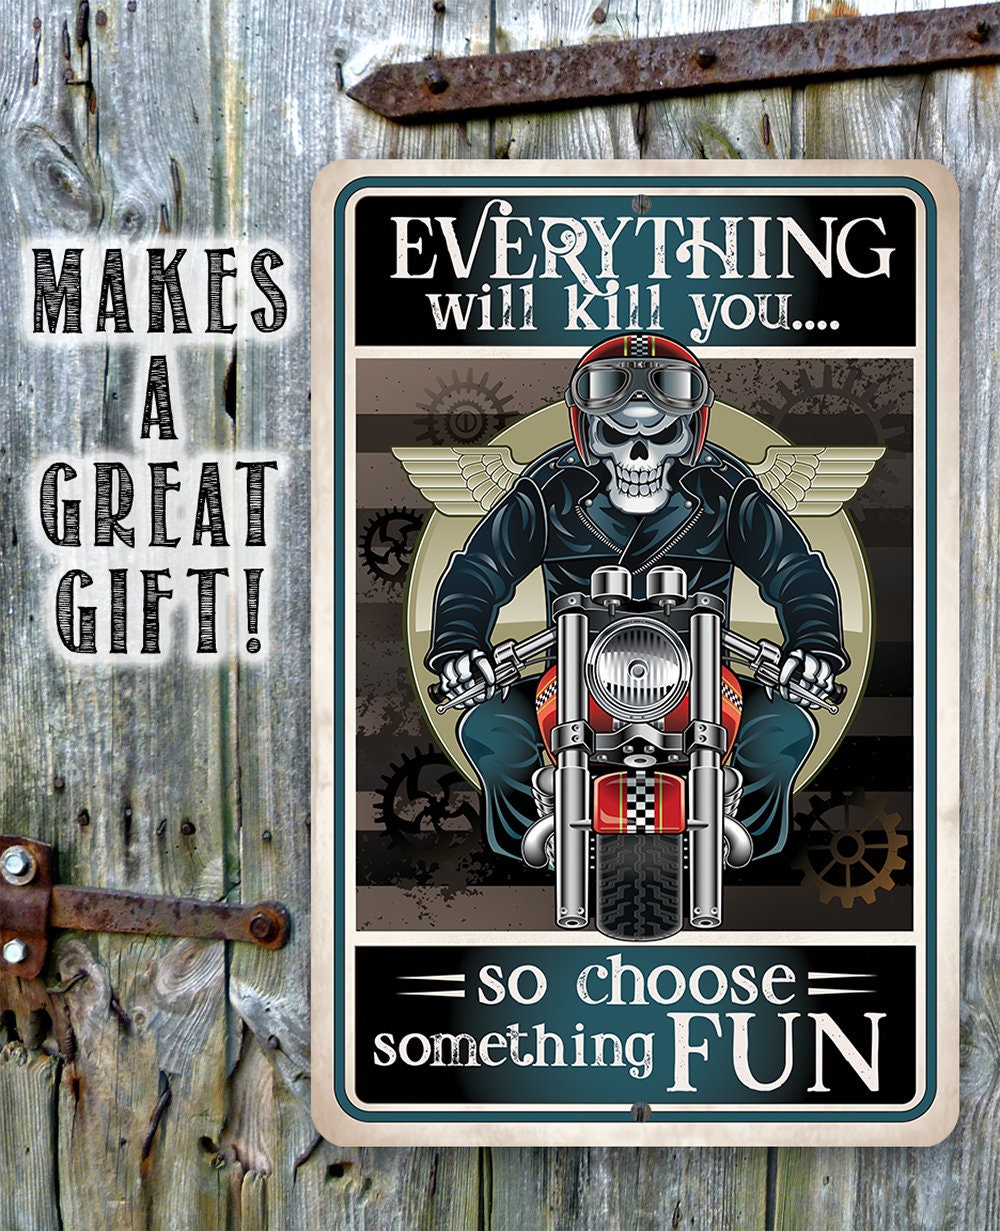 Everything Will Kill You So Choose Fun - 8" x 12" or 12" x 18" Aluminum Tin Awesome Metal Poster Lone Star Art 